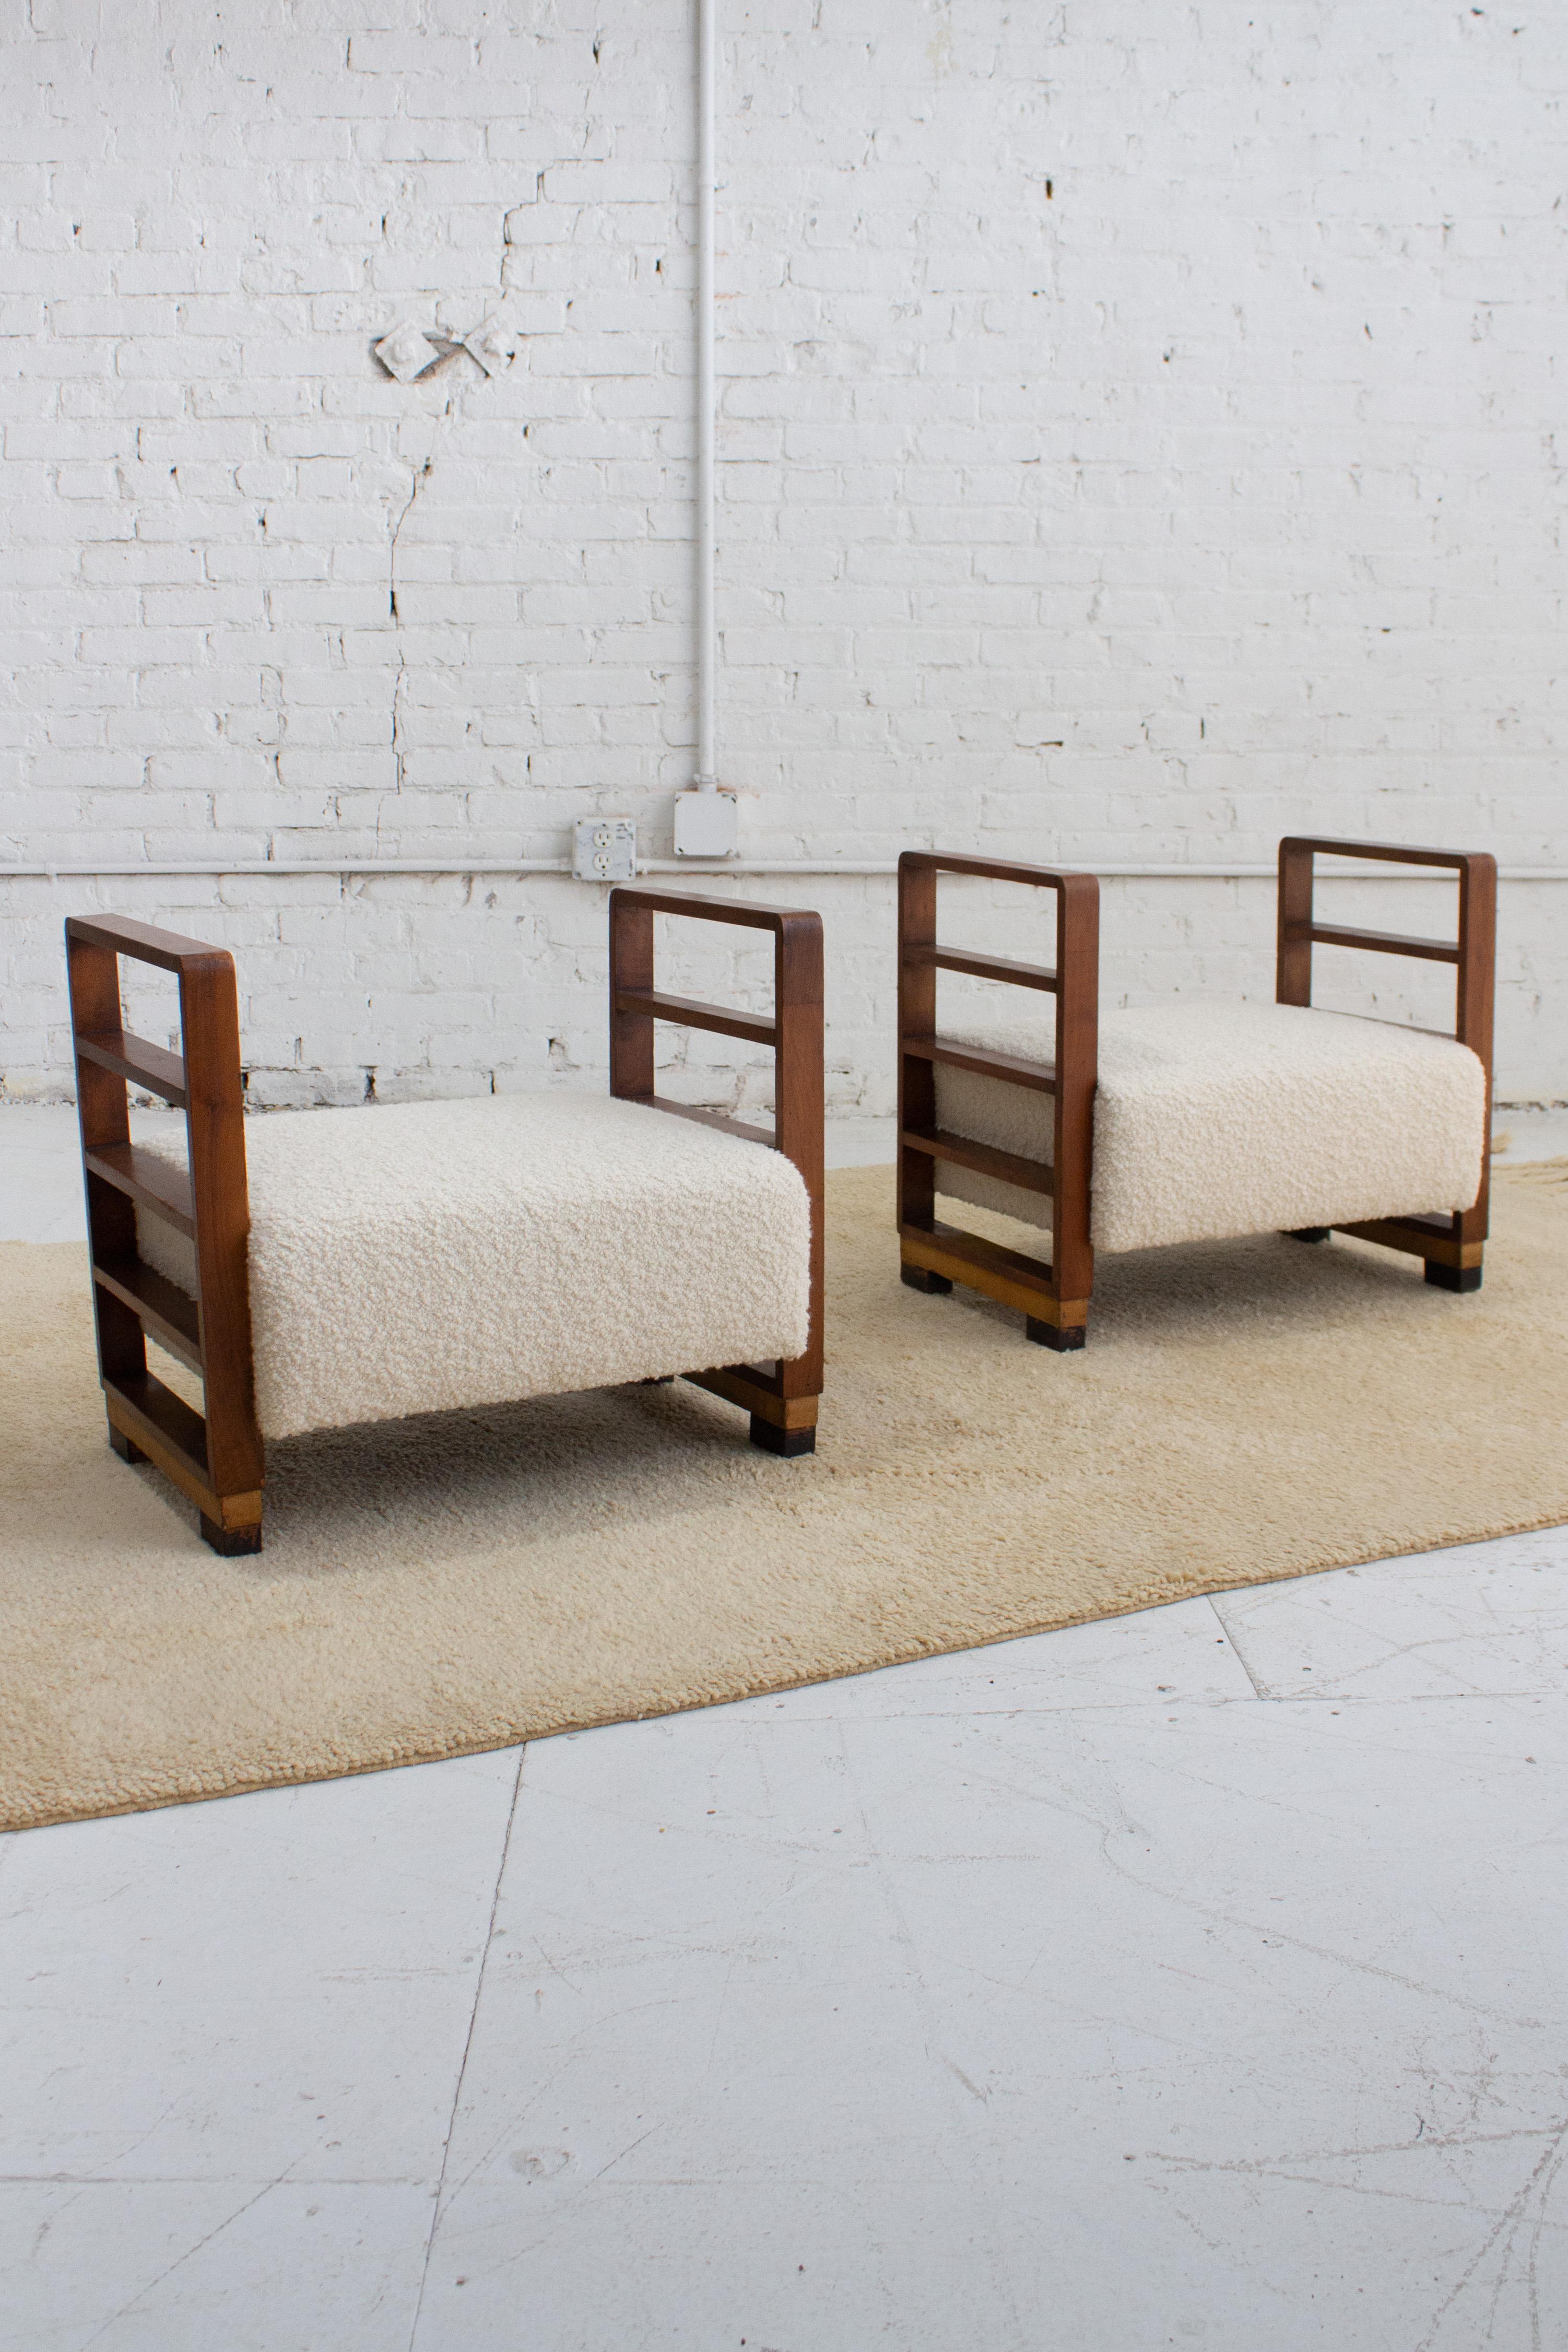 A pair of wooden benches attributed to Paolo Buffa for Arrighi. Wooden ladder style silhouette. Newly reupholstered in a high quality wool bouclé. Heavy patina on wood frames throughout. Sourced in Northern Italy. Sold a as set.